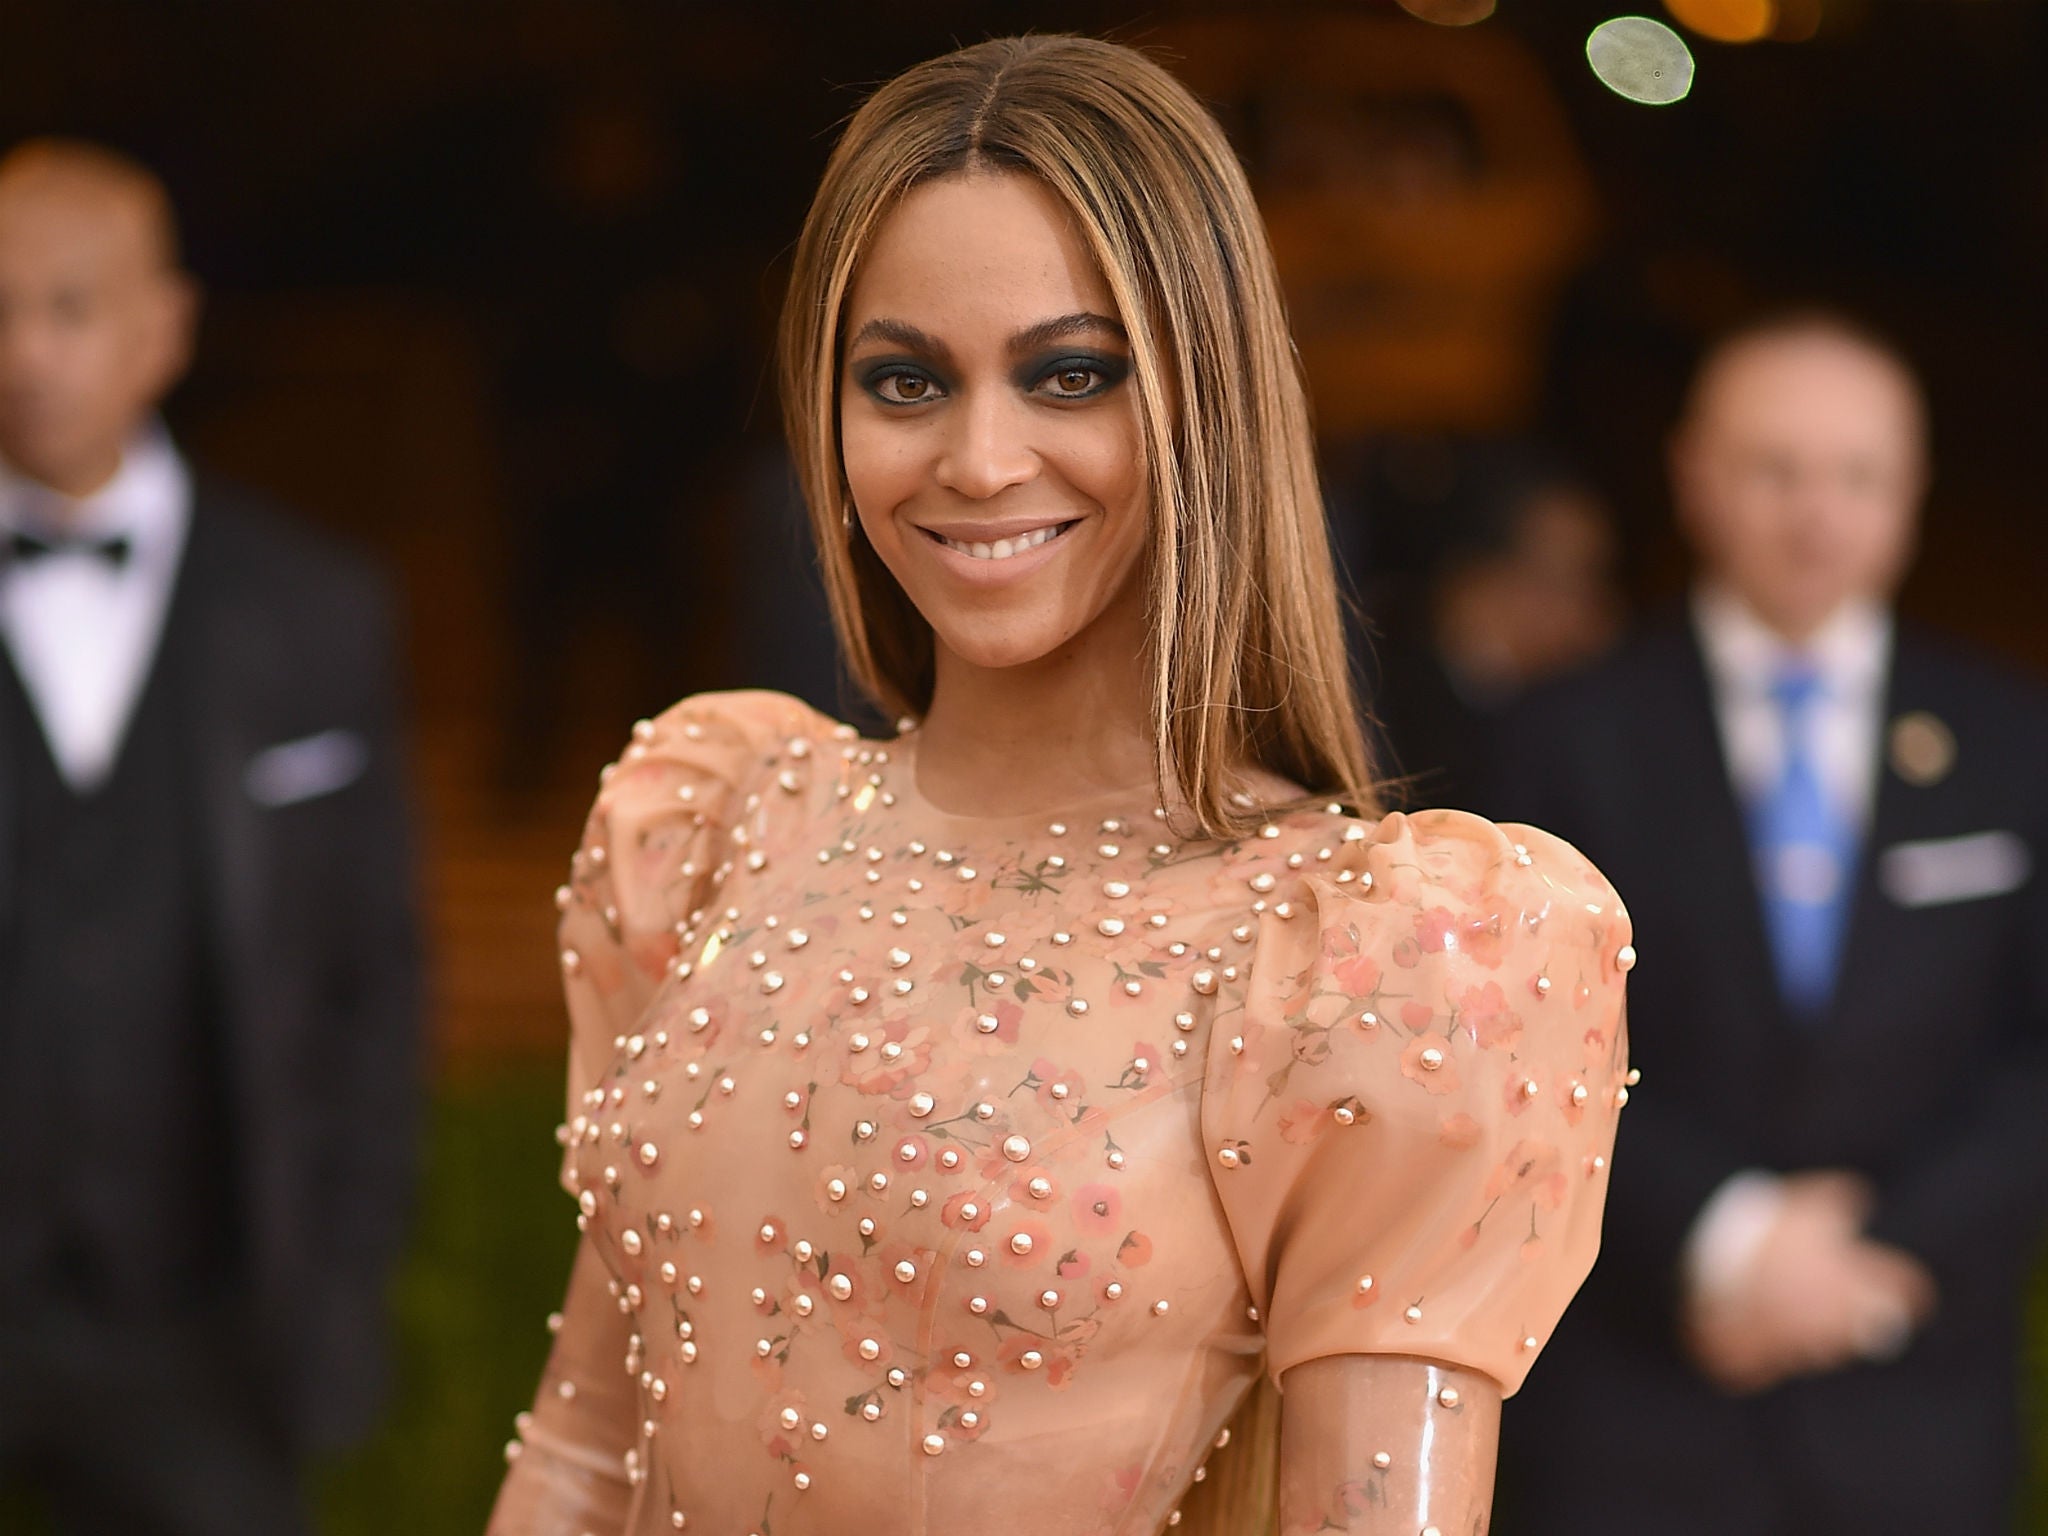 Beyoncé at the Met Gala, in a dress that some people pointed out looked like a piece of skin